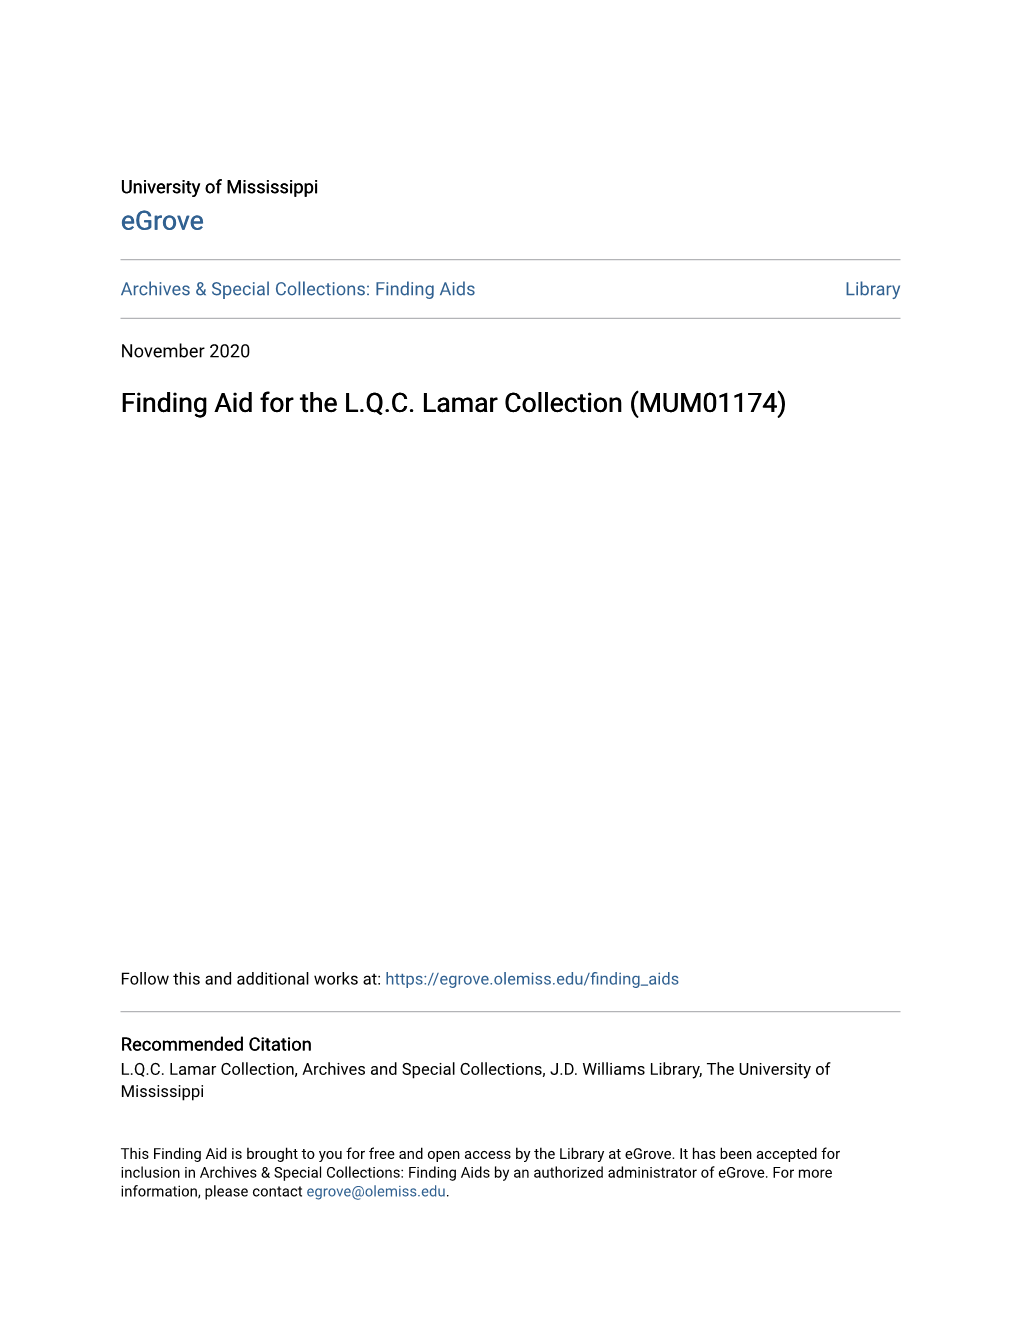 Finding Aid for the LQC Lamar Collection